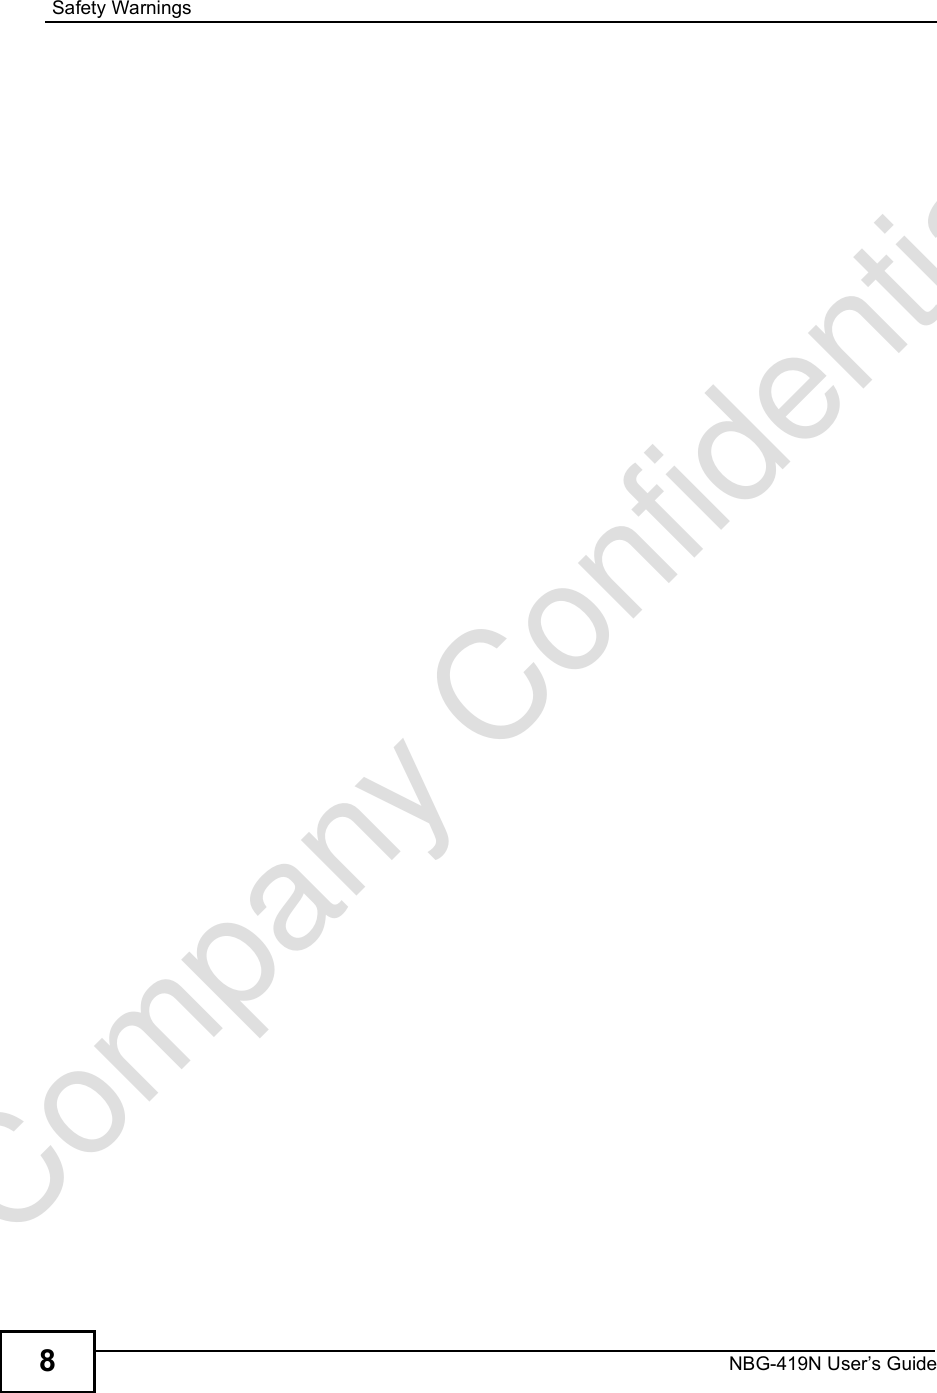 Safety WarningsNBG-419N User s Guide8Company Confidential